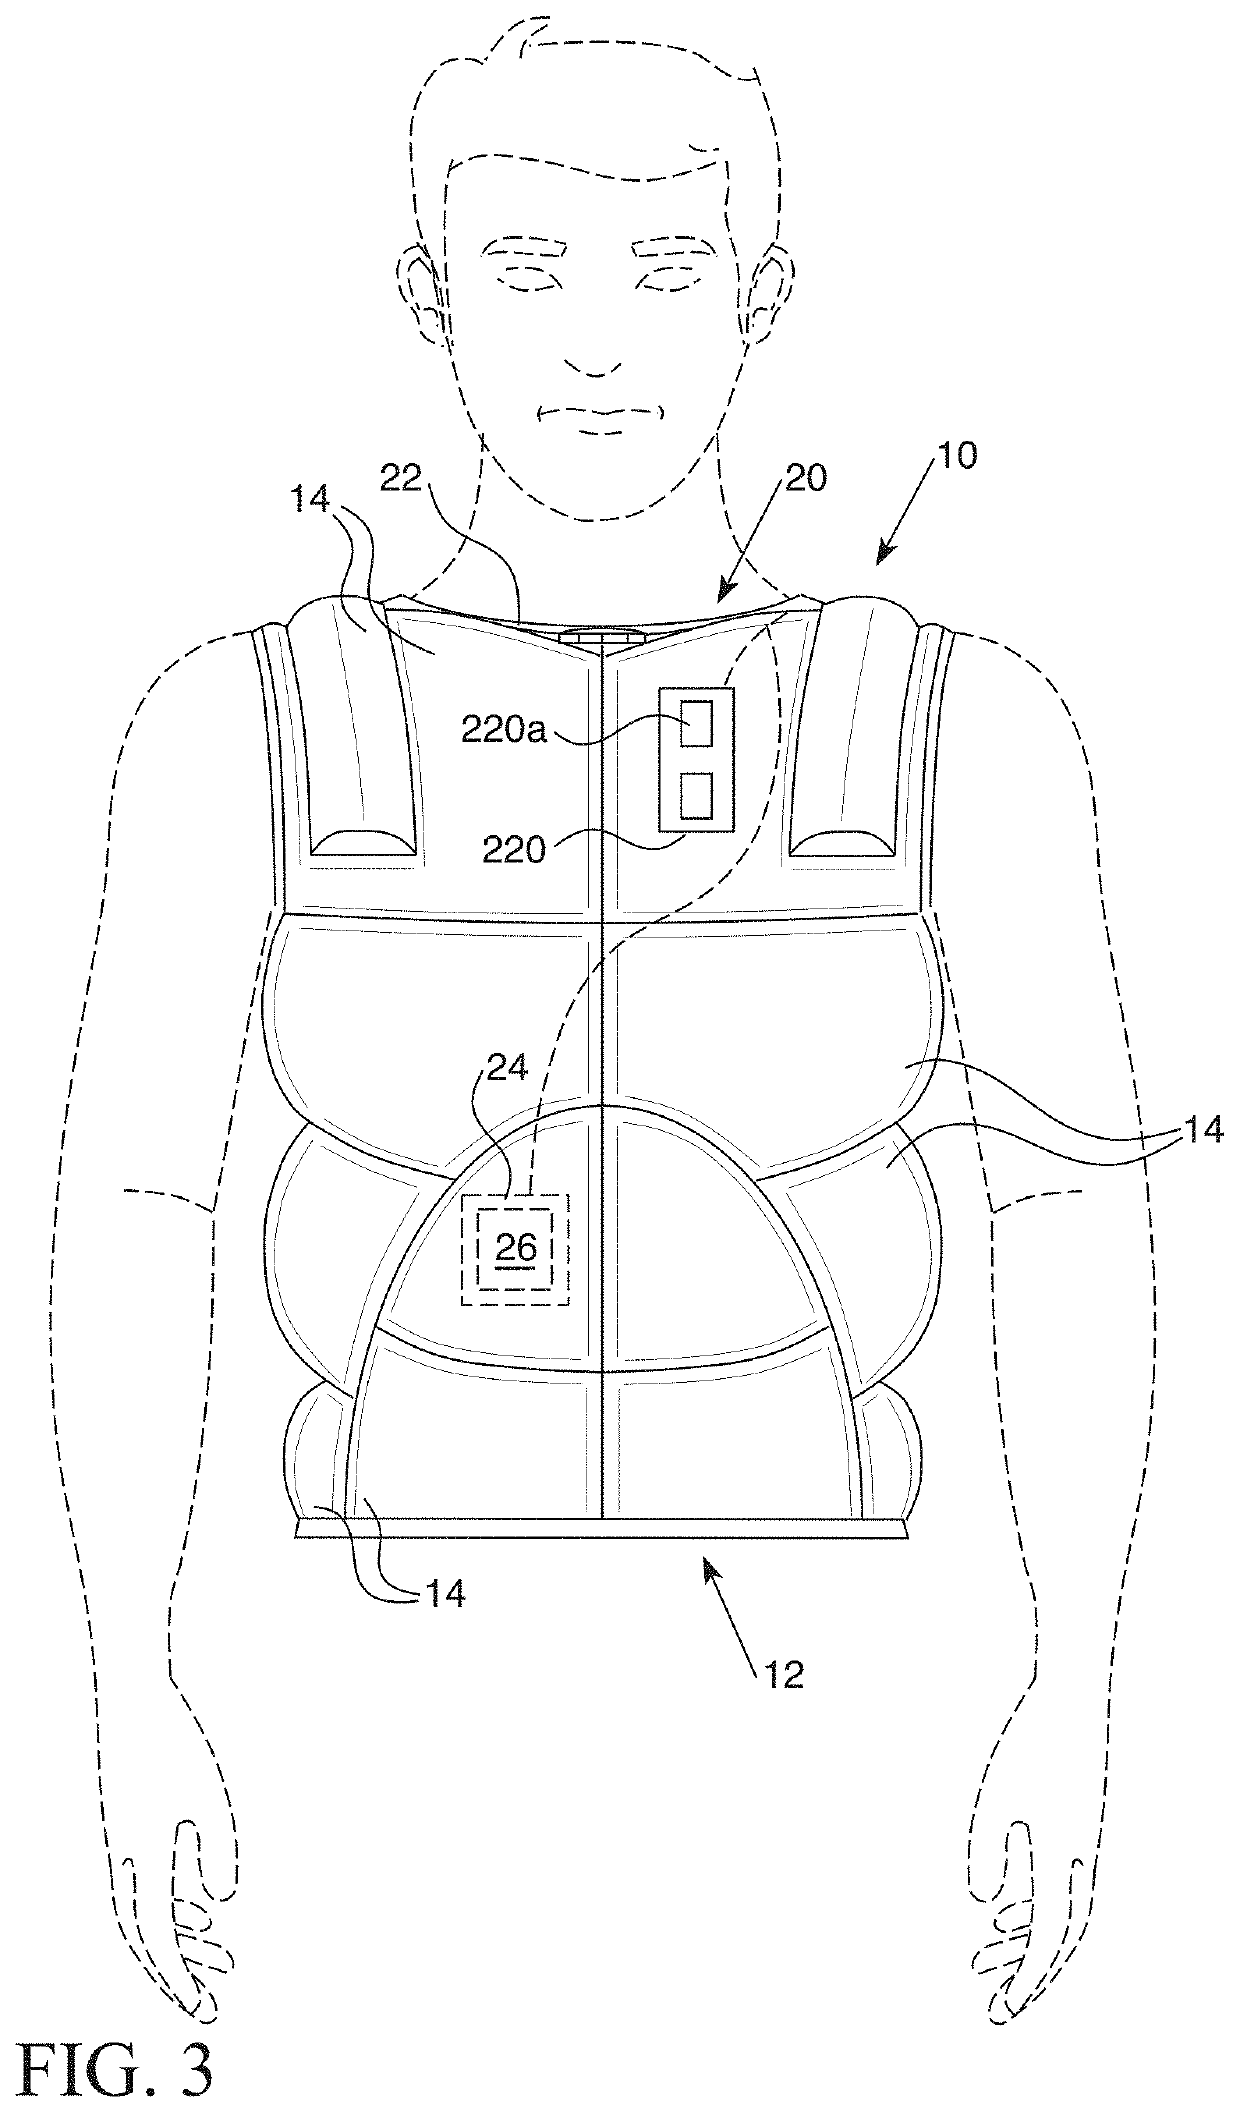 Water safety garment, related apparatus and methods